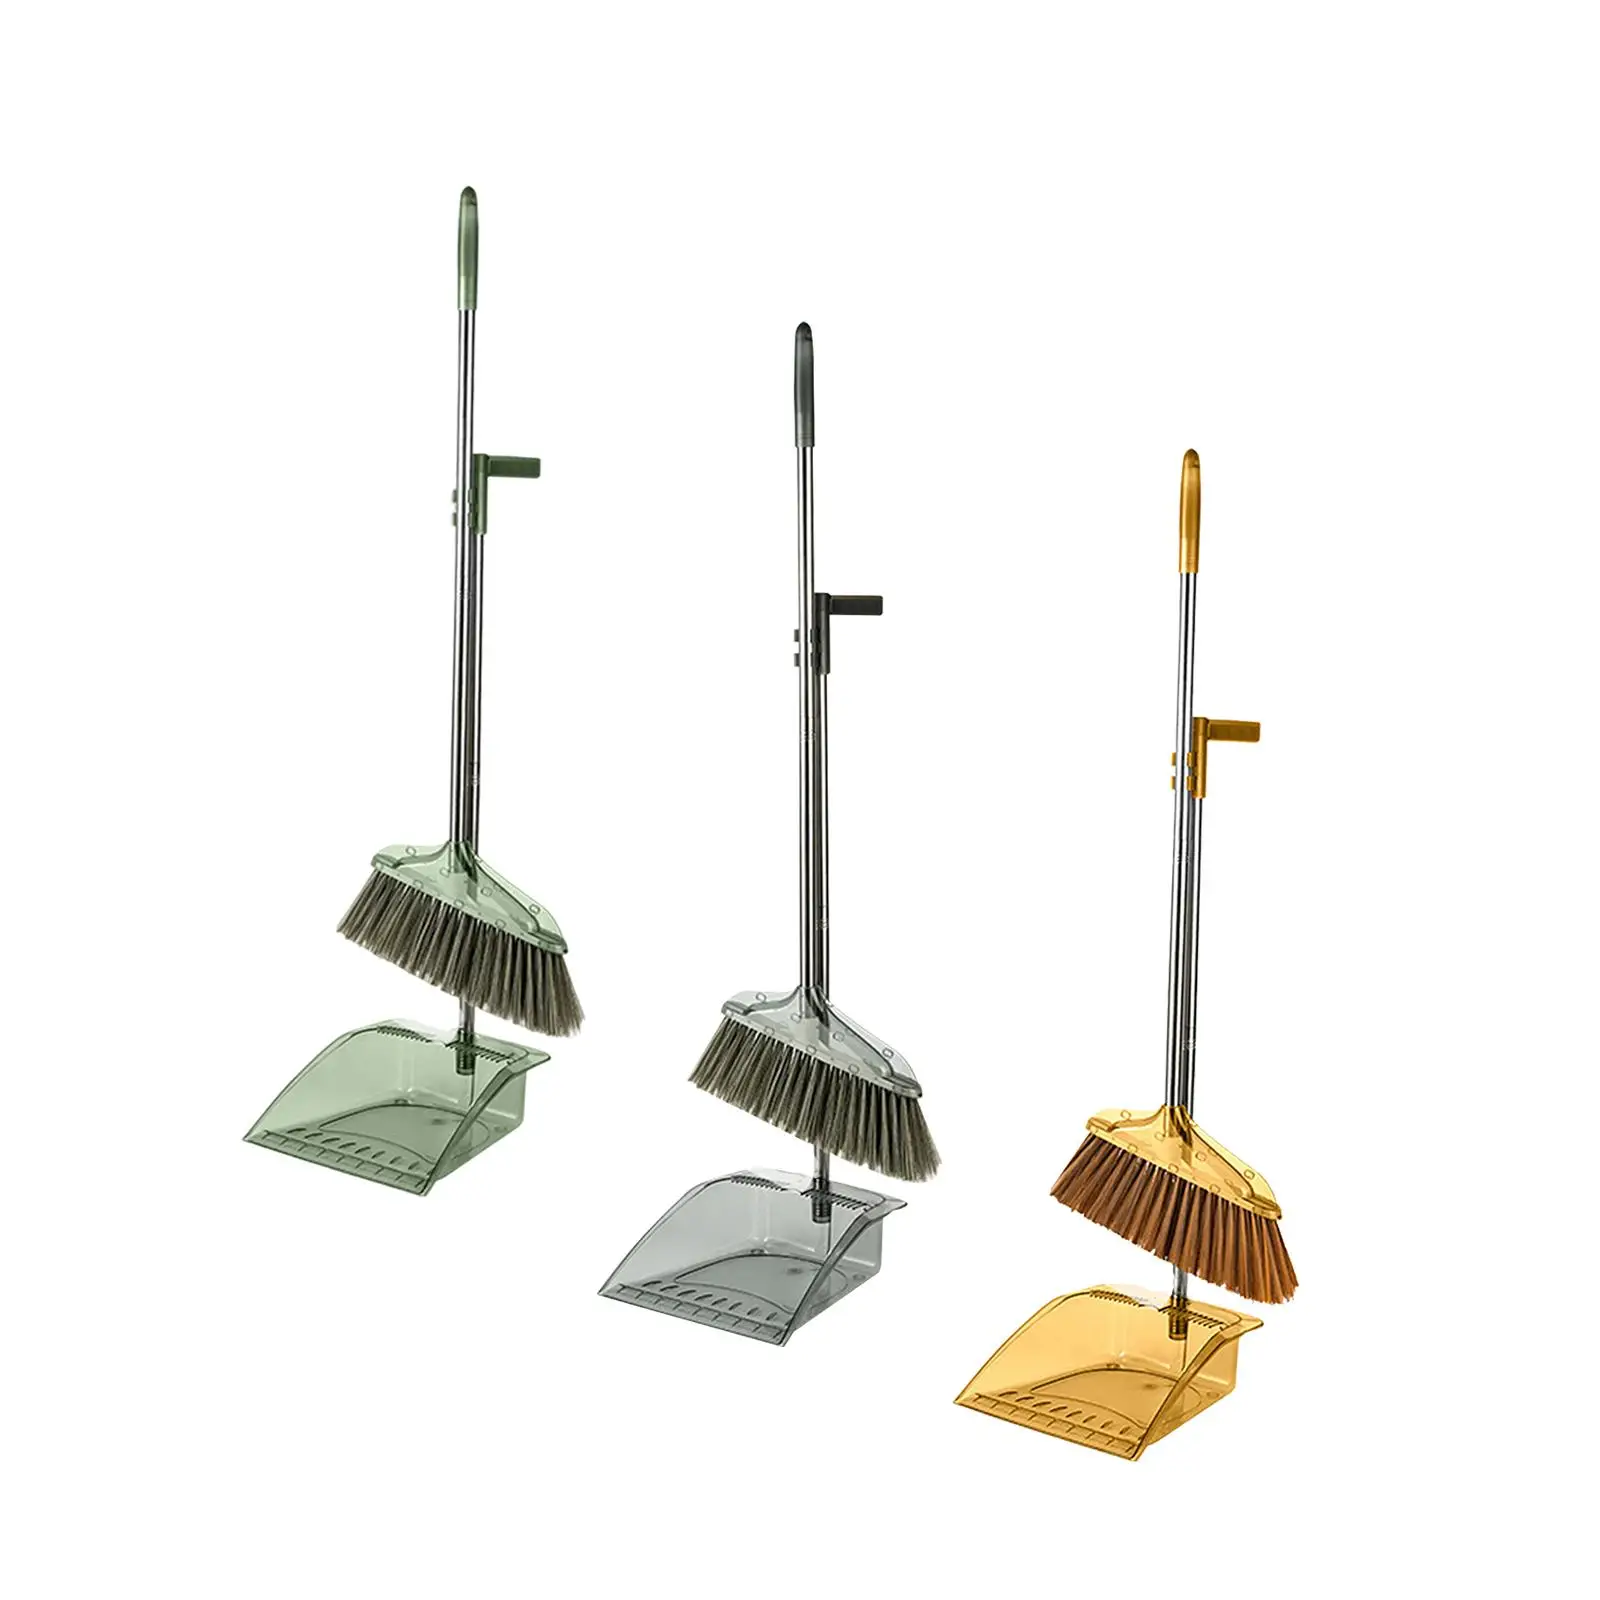 Broom Dustpan Set Hair Sweeping Upright Standing Broom Dust Pan Dust Brooms Set for Office Indoor Home Kitchen Cleaning Gadgets